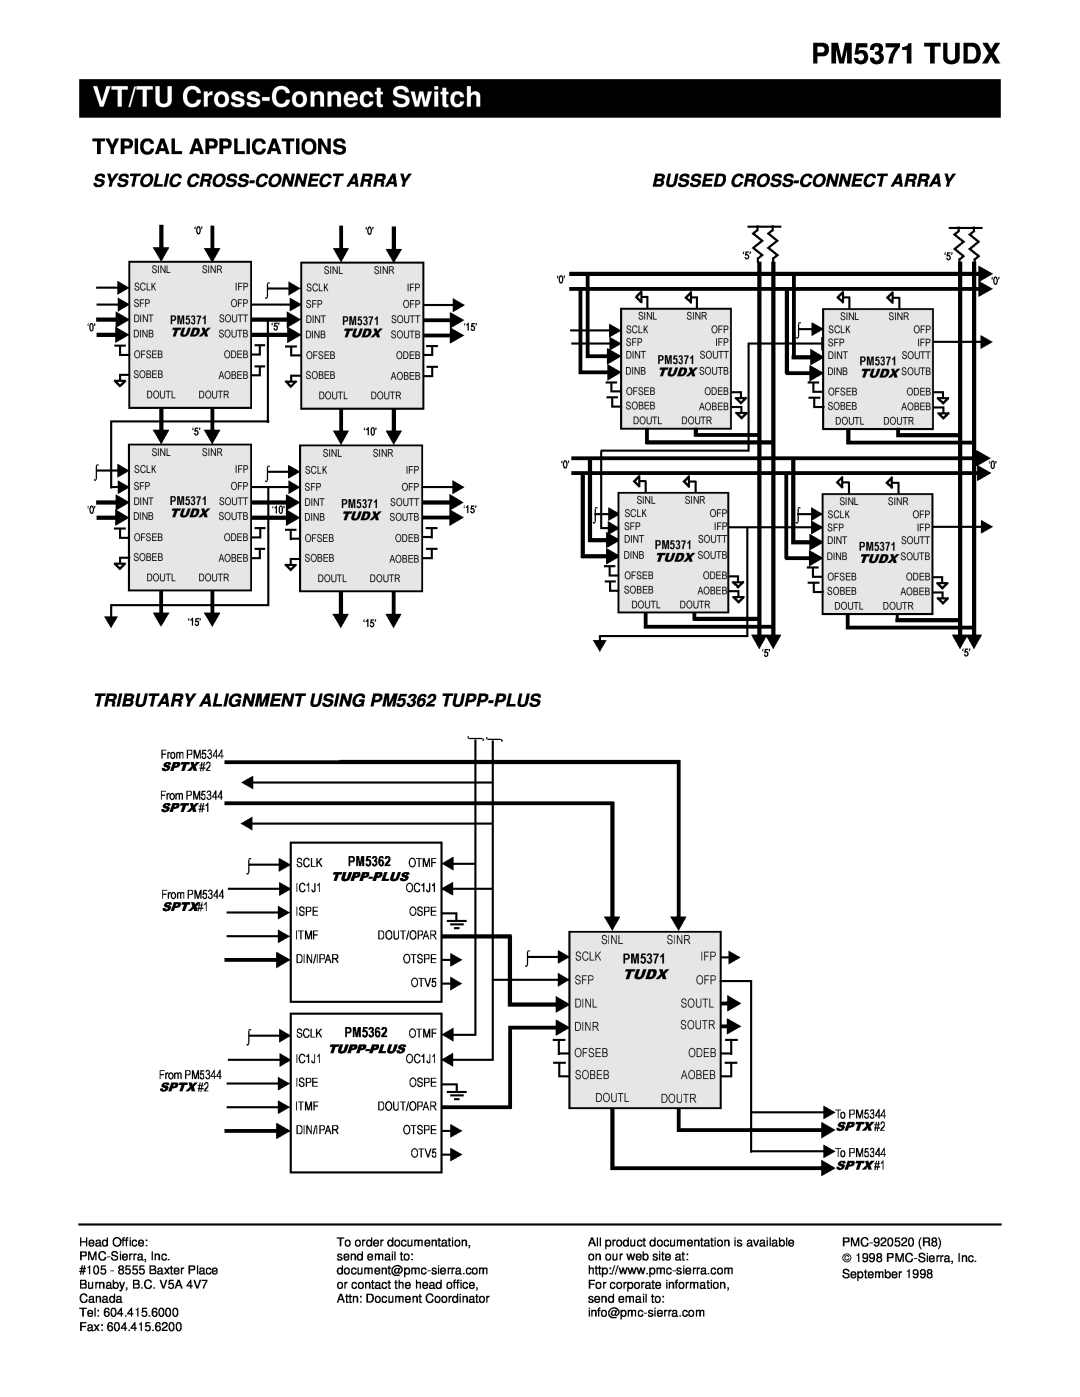 PMC-Sierra manual Typical Applications, PM5371 TUDX, VT/TU Cross-Connect Switch, Systolic Cross-Connect Array 